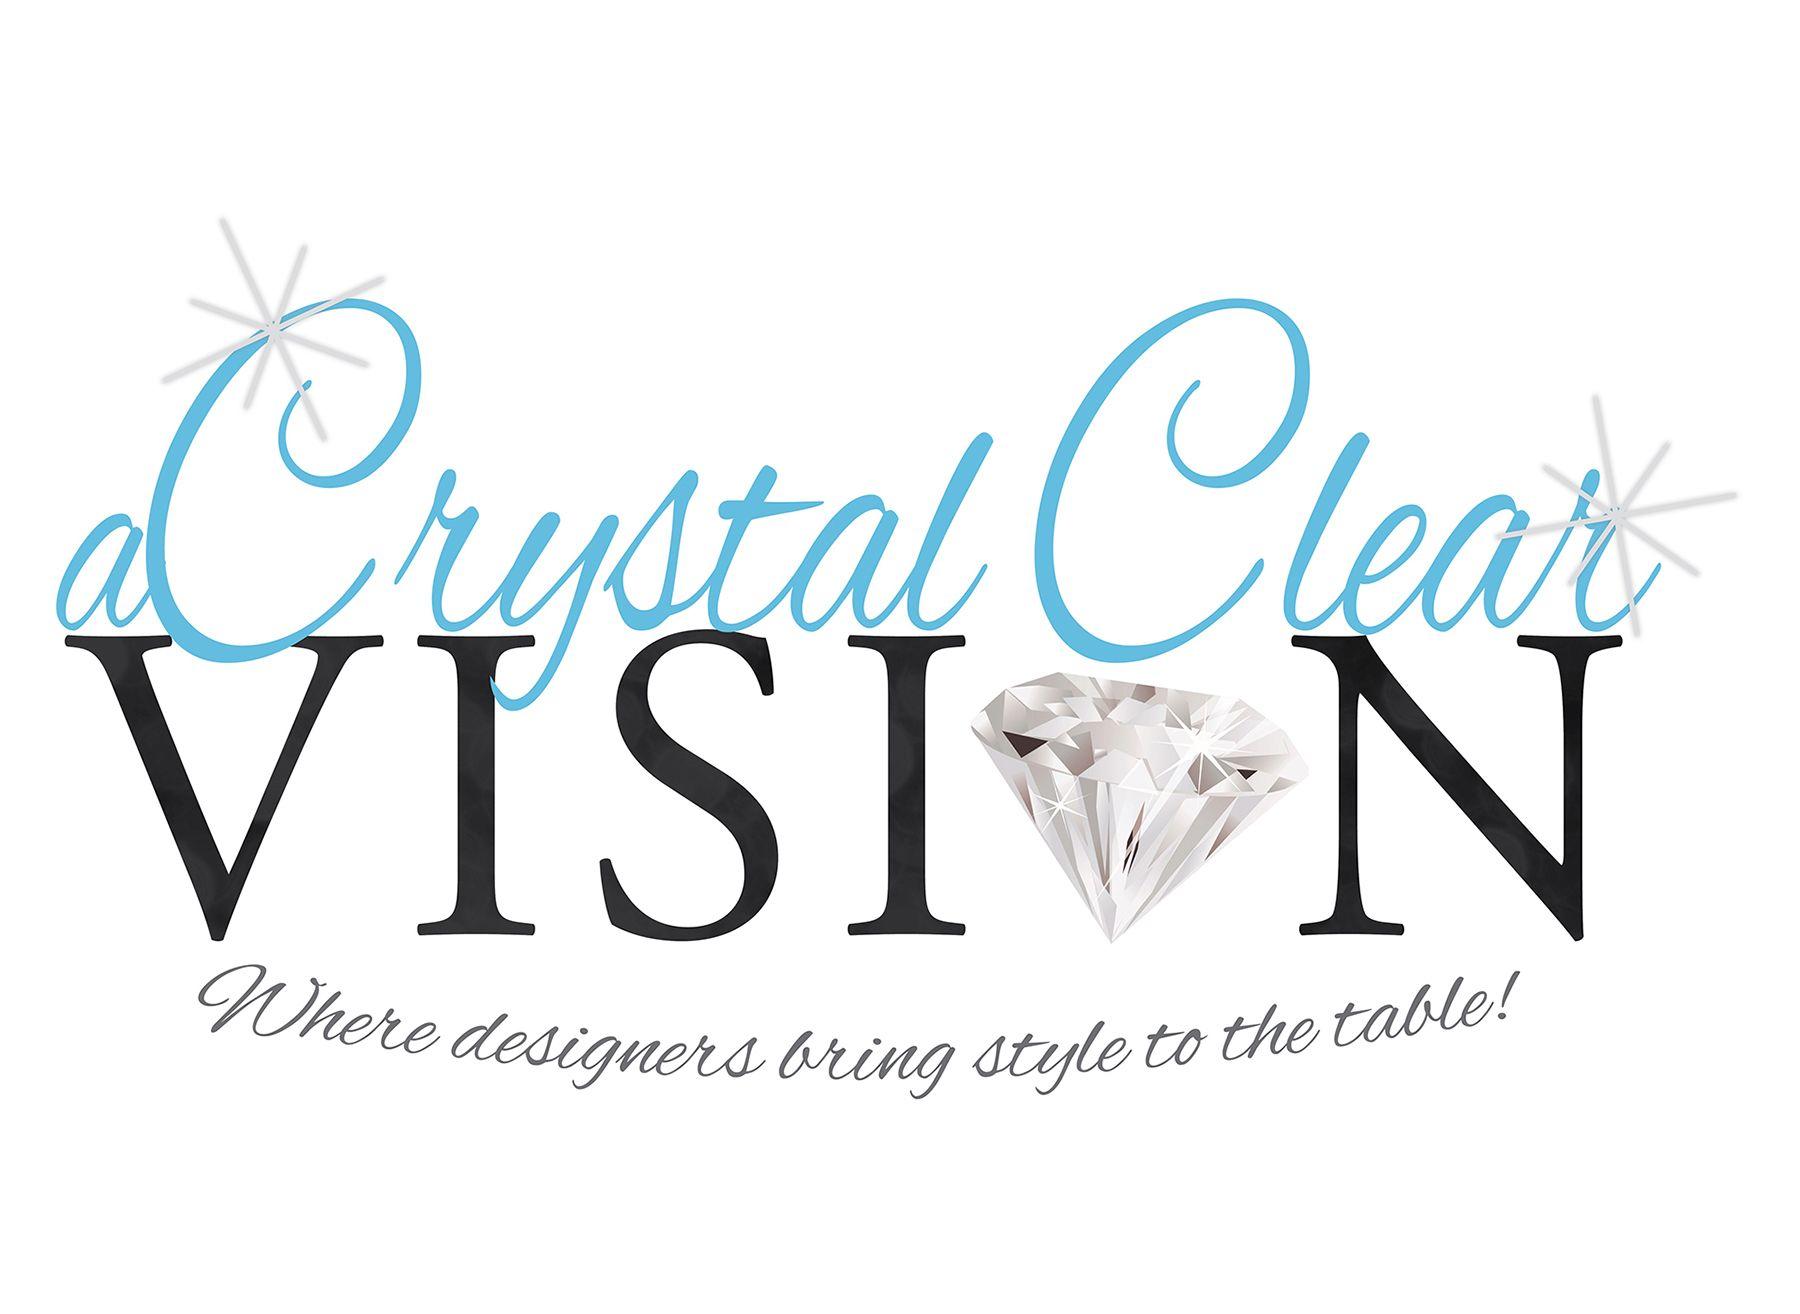 Crystal Clear Logo - ViewitDoit.com Crystal Clear Vision Event